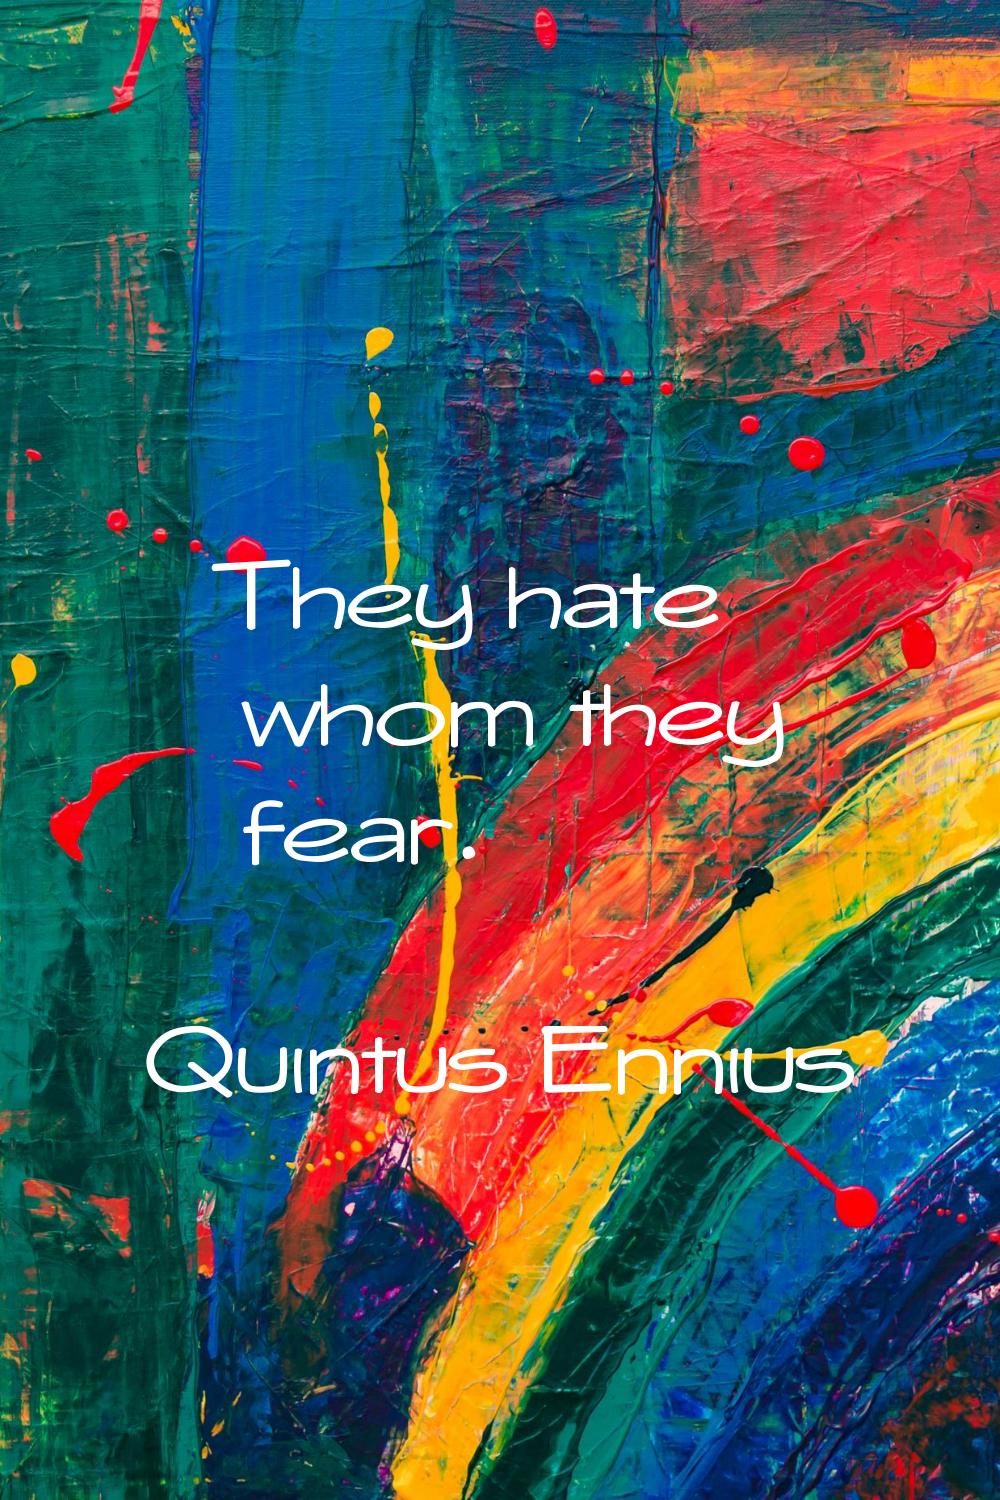 They hate whom they fear.